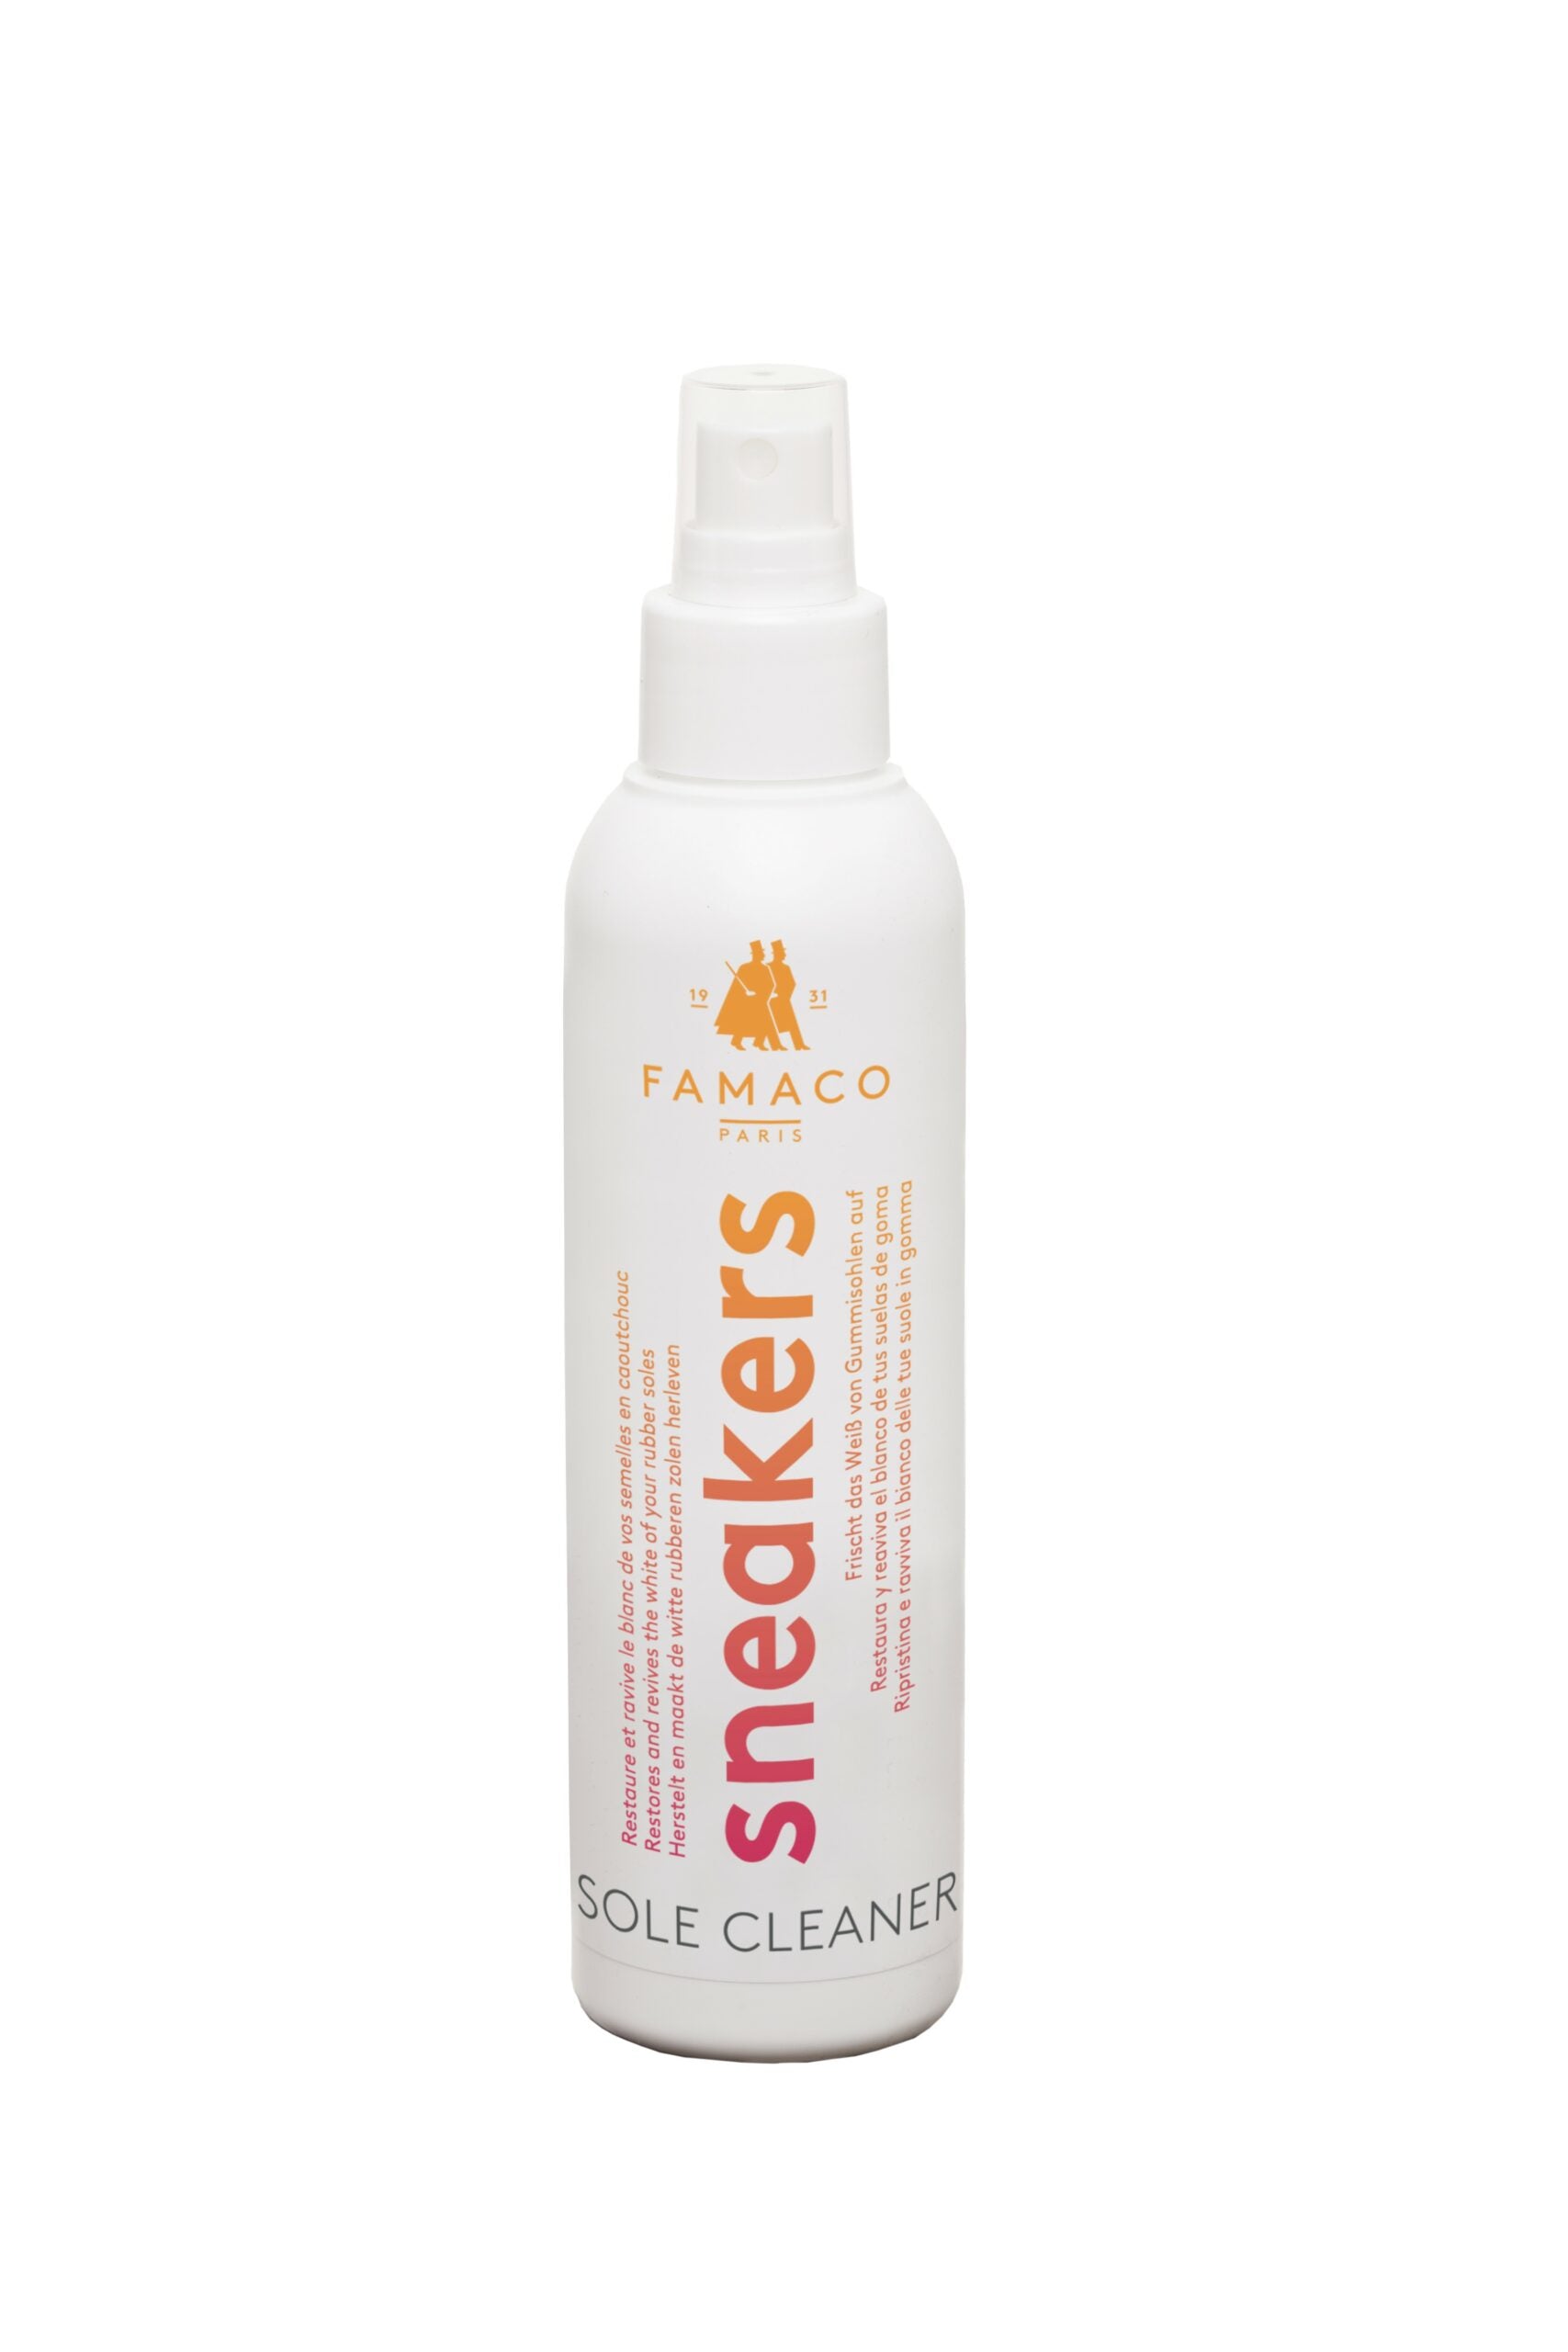 A sneakers sole cleaner spray by Famaco.